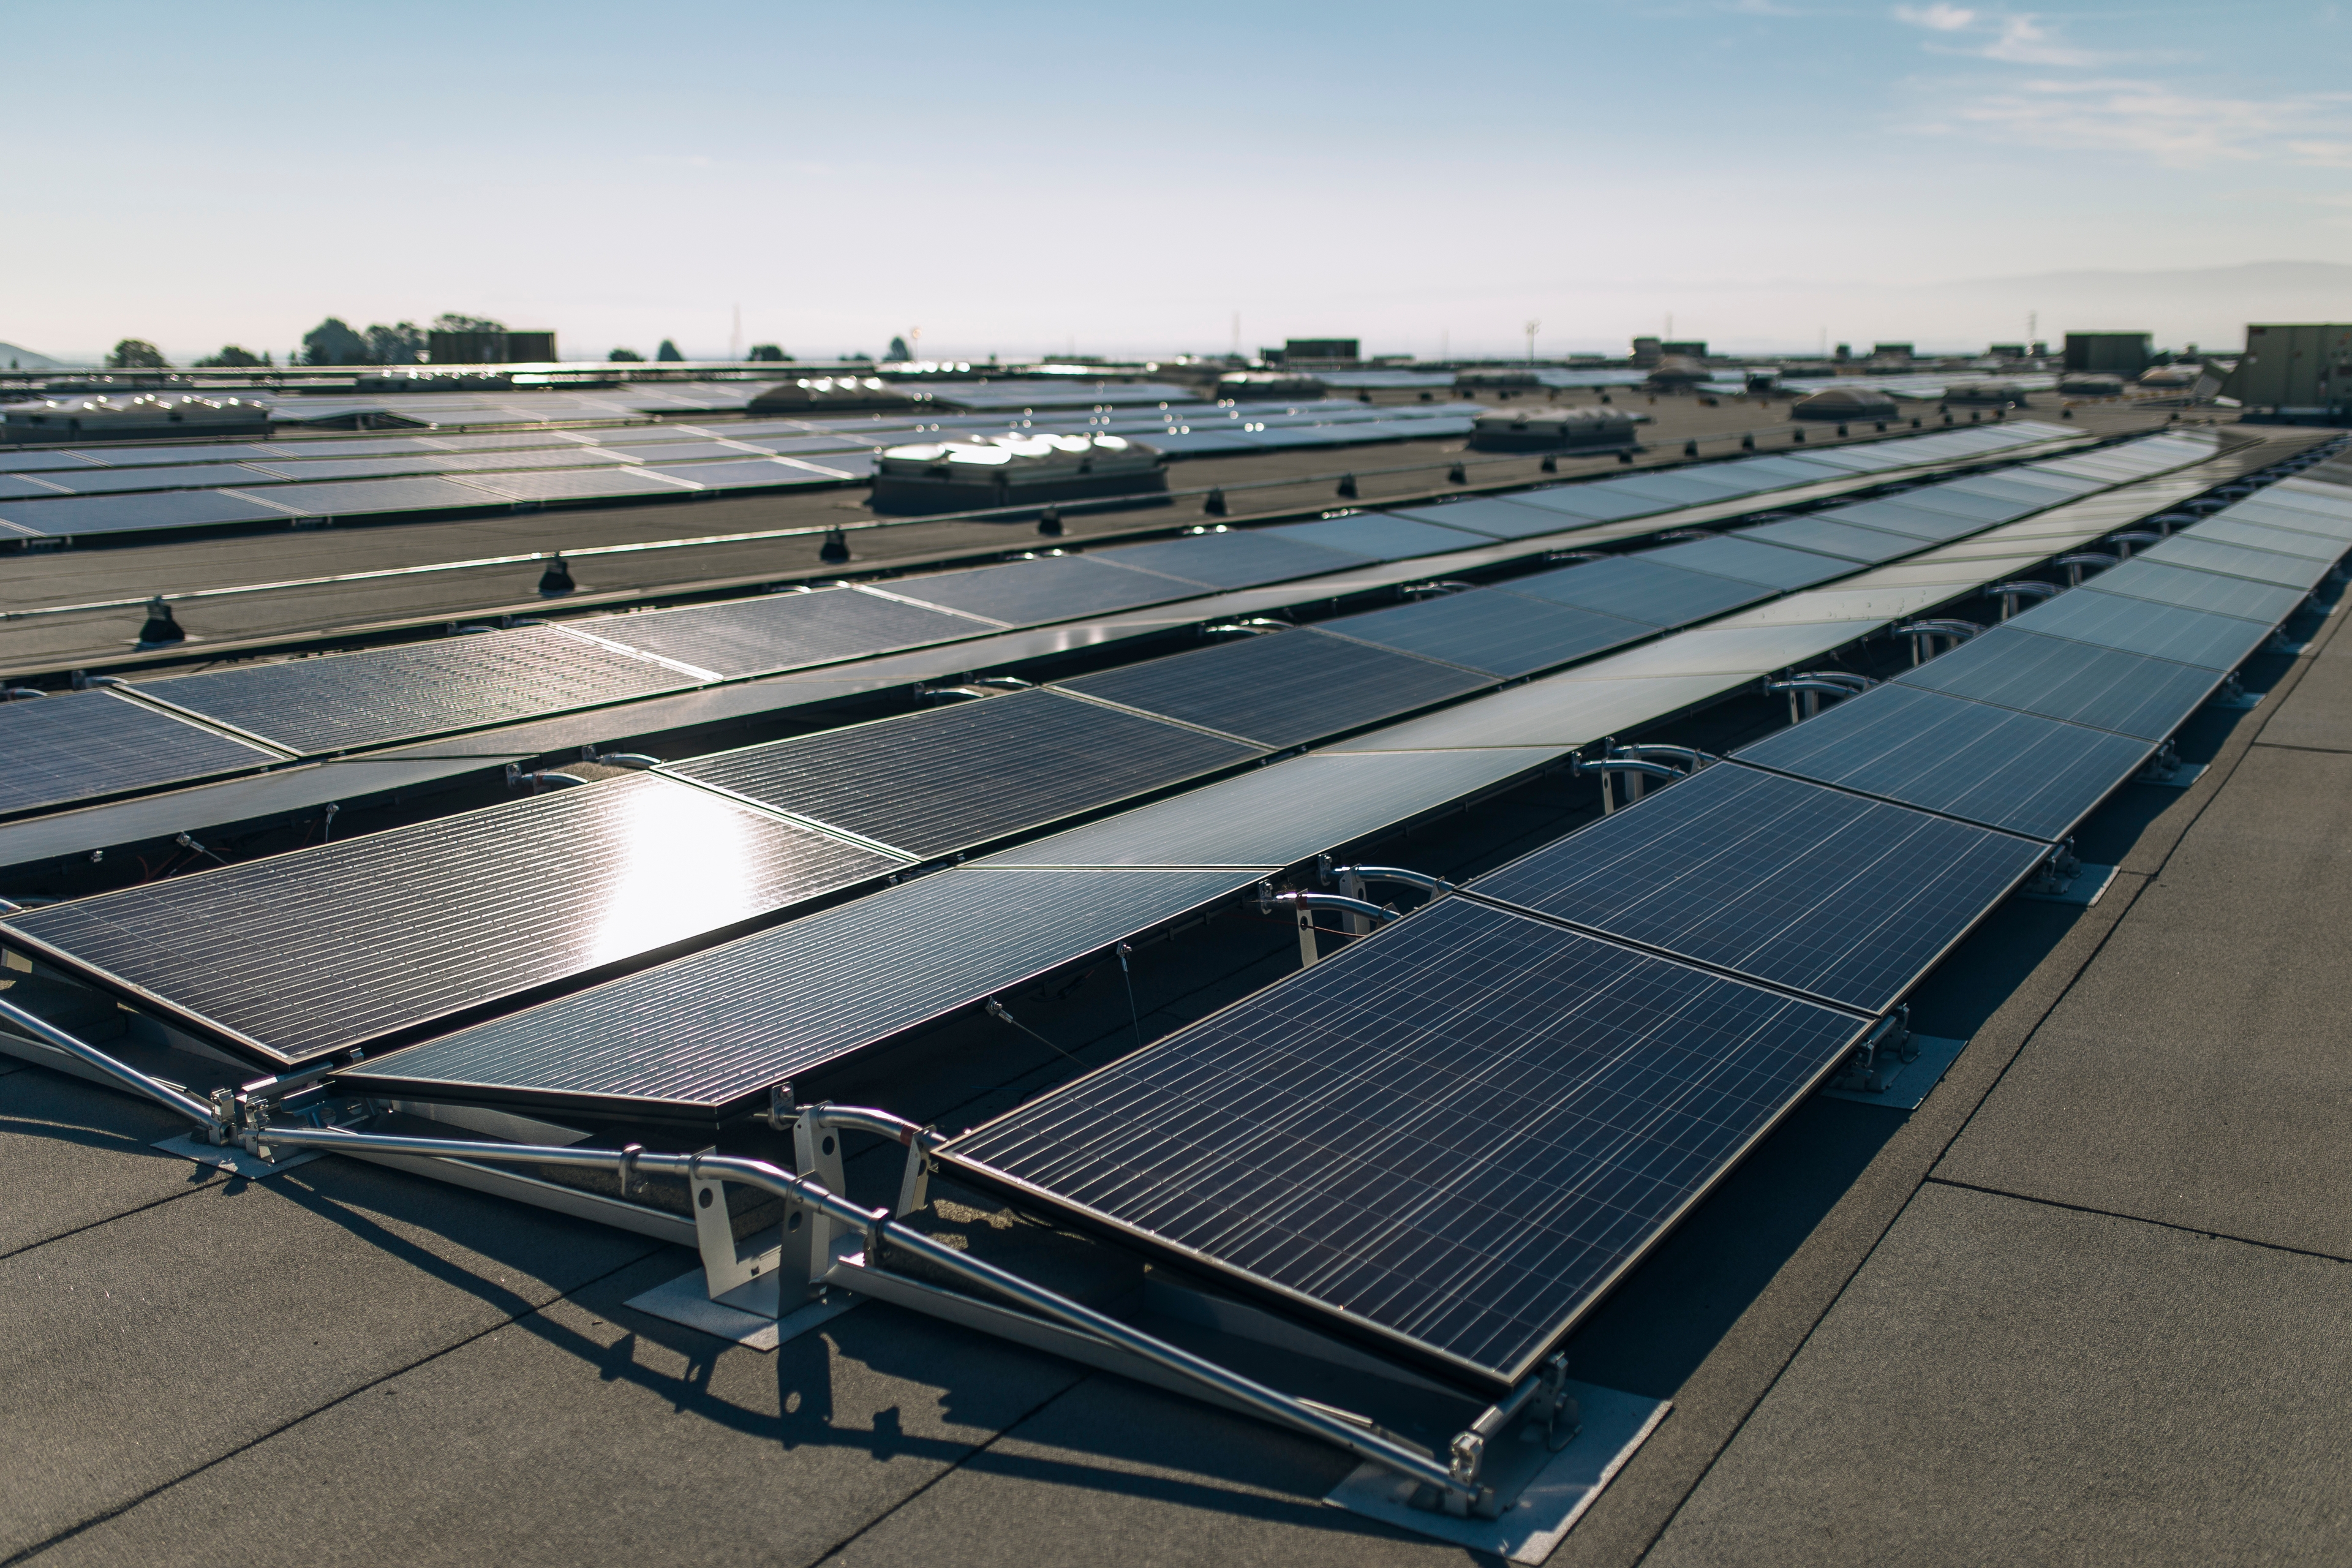 Solar panels on the rooftop of an Amazon fulfillment center